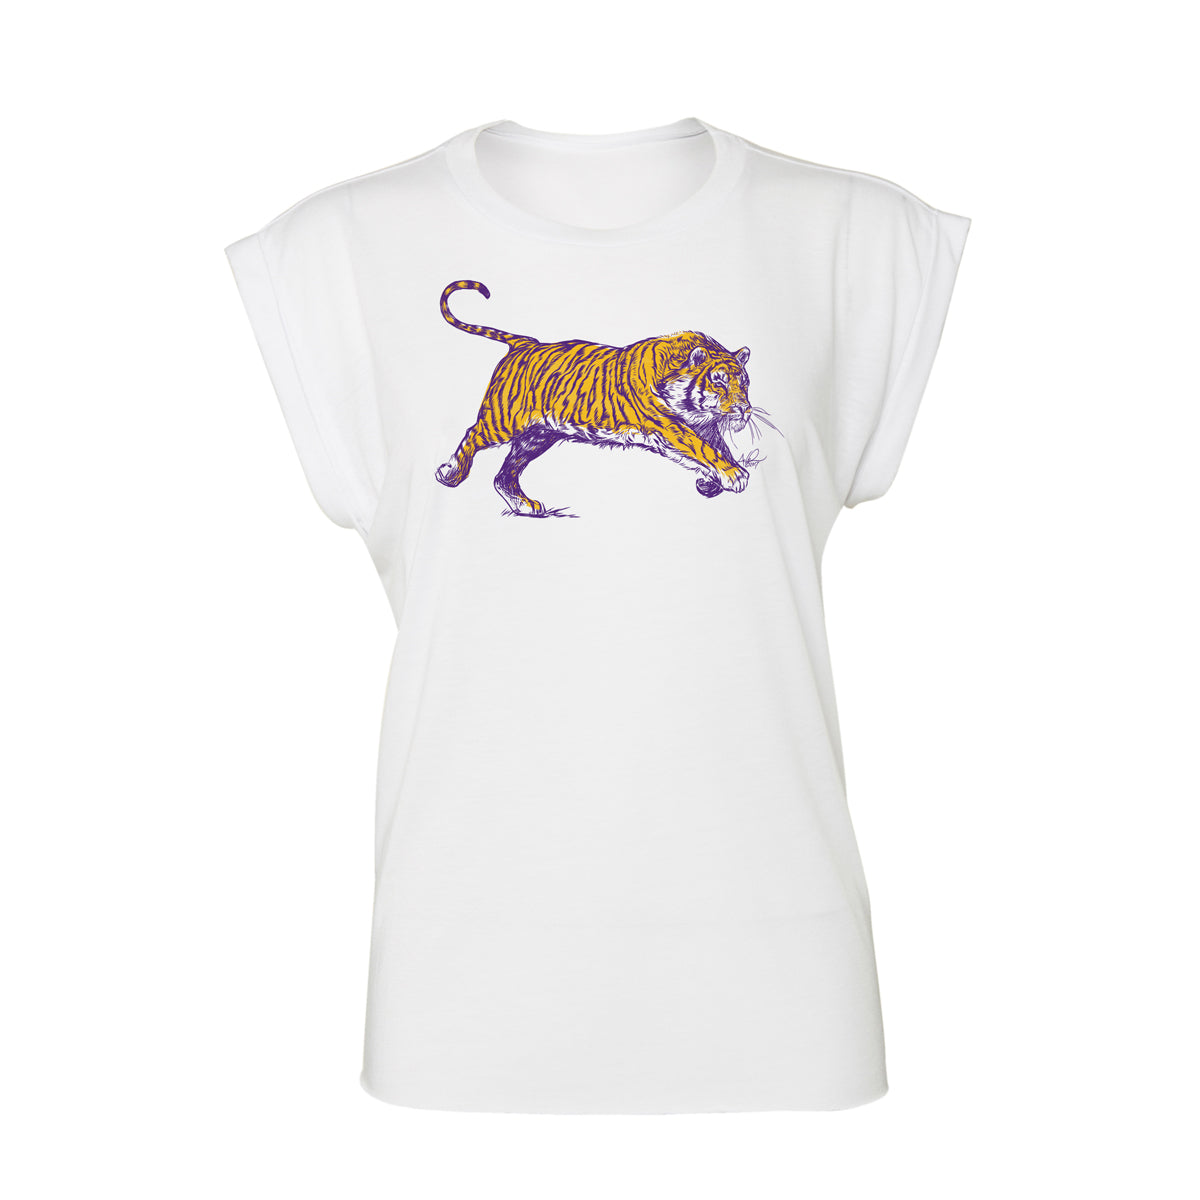 Charging Tiger Women's Top, Purple & Gold on White - Andrew Lee Design